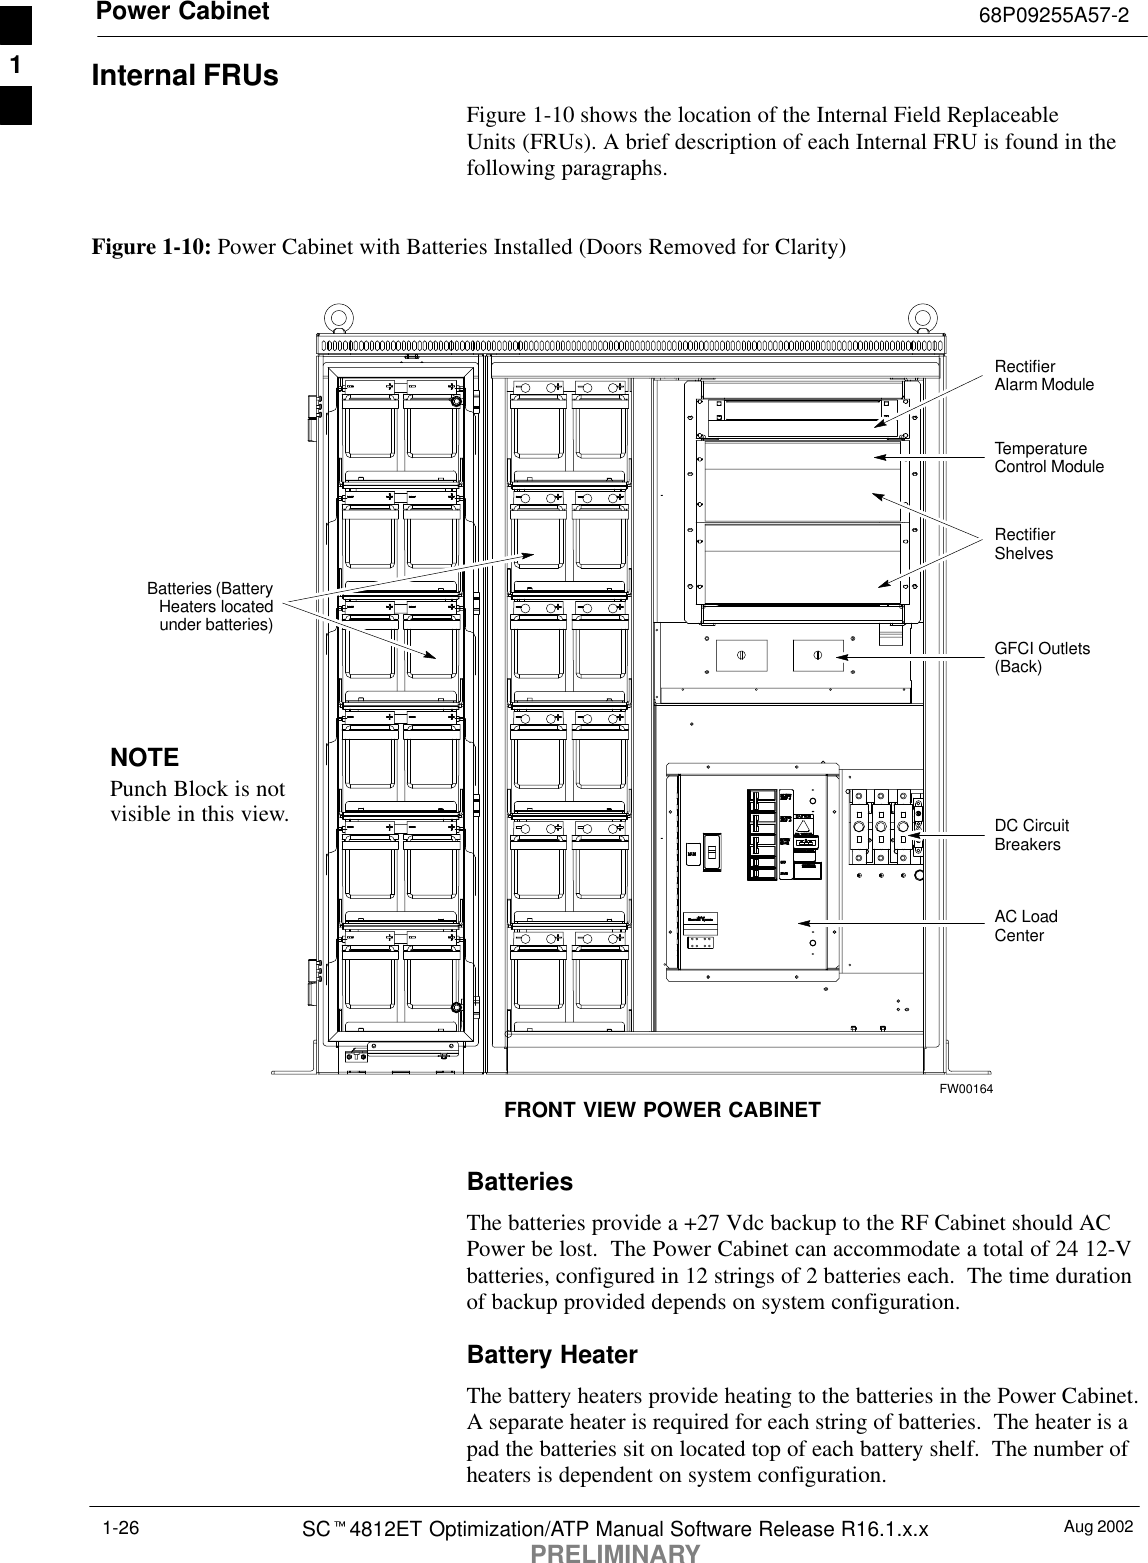 Power Cabinet 68P09255A57-2Aug 2002SCt4812ET Optimization/ATP Manual Software Release R16.1.x.xPRELIMINARY1-26Internal FRUsFigure 1-10 shows the location of the Internal Field ReplaceableUnits (FRUs). A brief description of each Internal FRU is found in thefollowing paragraphs.Figure 1-10: Power Cabinet with Batteries Installed (Doors Removed for Clarity)NOTEPunch Block is notvisible in this view.RectifierShelvesRectifierAlarm ModuleDC CircuitBreakersAC LoadCenterGFCI Outlets(Back)TemperatureControl ModuleFRONT VIEW POWER CABINETBatteries (BatteryHeaters locatedunder batteries)FW00164BatteriesThe batteries provide a +27 Vdc backup to the RF Cabinet should ACPower be lost.  The Power Cabinet can accommodate a total of 24 12-Vbatteries, configured in 12 strings of 2 batteries each.  The time durationof backup provided depends on system configuration.Battery HeaterThe battery heaters provide heating to the batteries in the Power Cabinet.A separate heater is required for each string of batteries.  The heater is apad the batteries sit on located top of each battery shelf.  The number ofheaters is dependent on system configuration.1